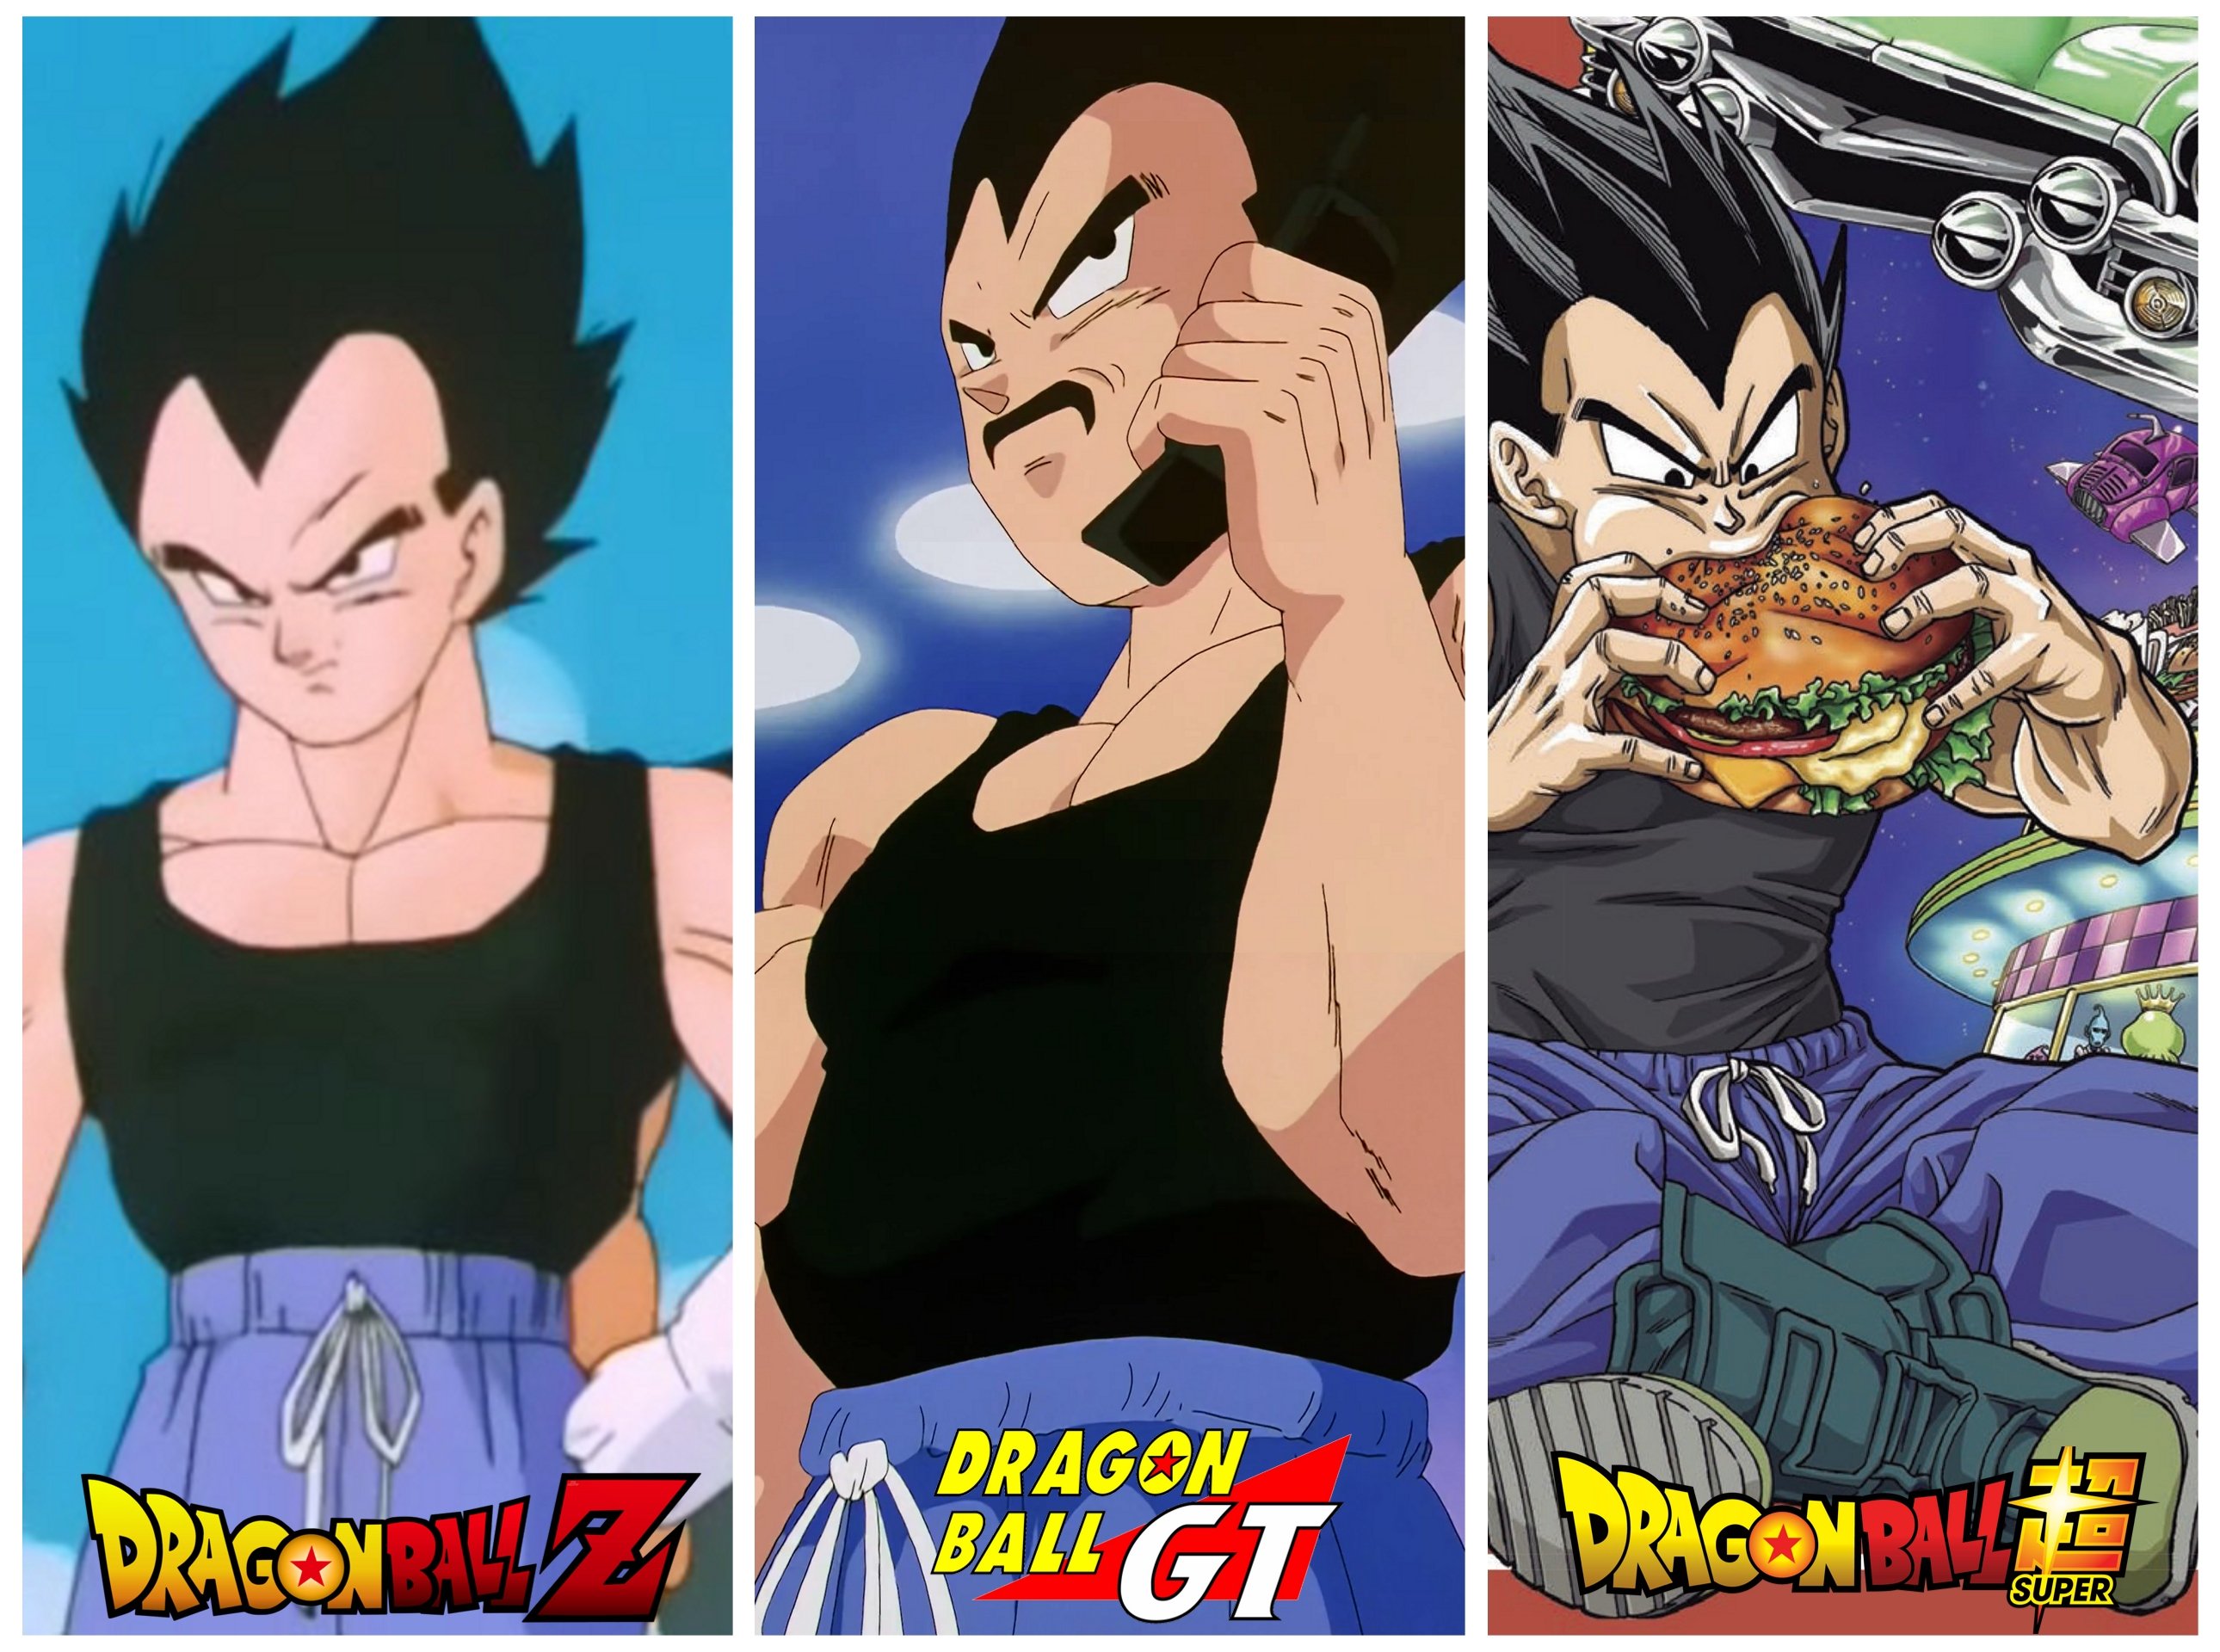 bandera nacional Andrew Halliday Desalentar Vegeta fans Club ar Twitter: "Vegeta in his training clothes in Dragon Ball  Z, GT and Super (manga) 💪 https://t.co/qm2h9Pxey8" / Twitter